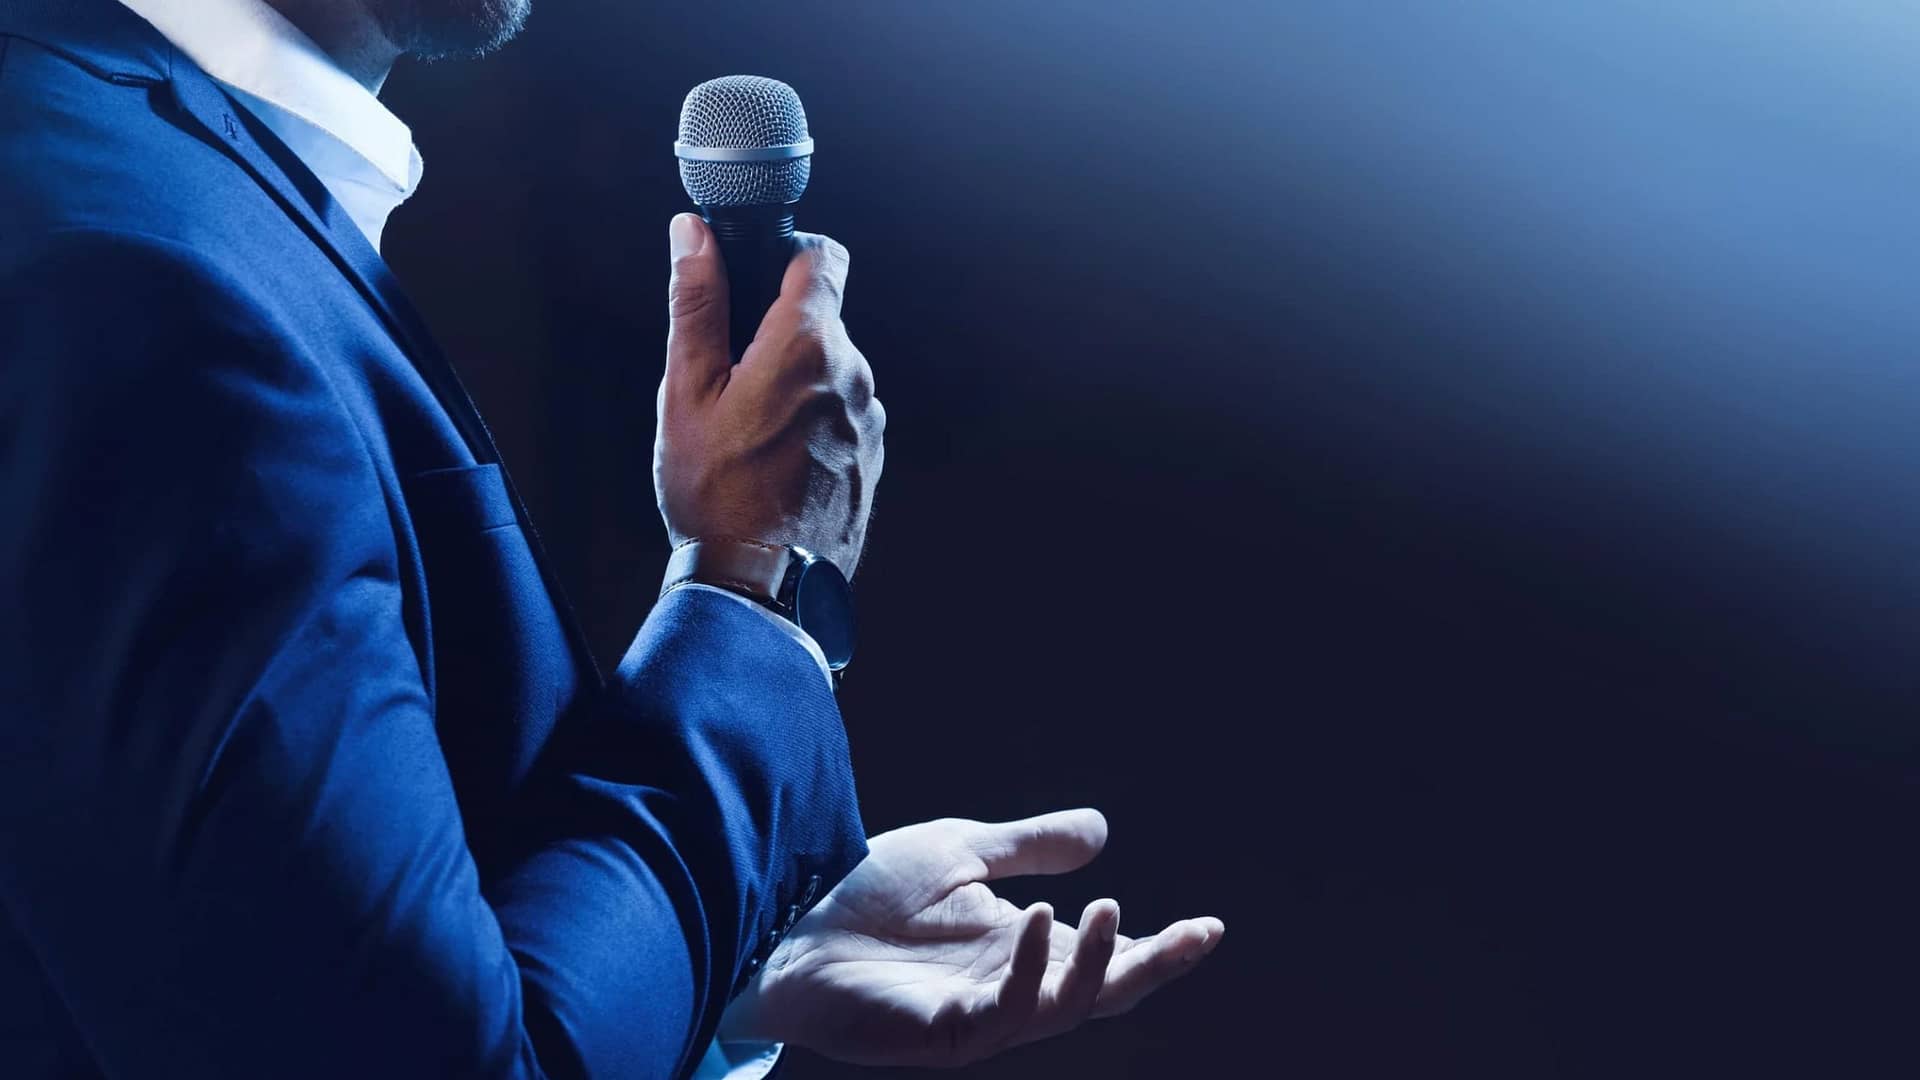 How to become a motivational speaker